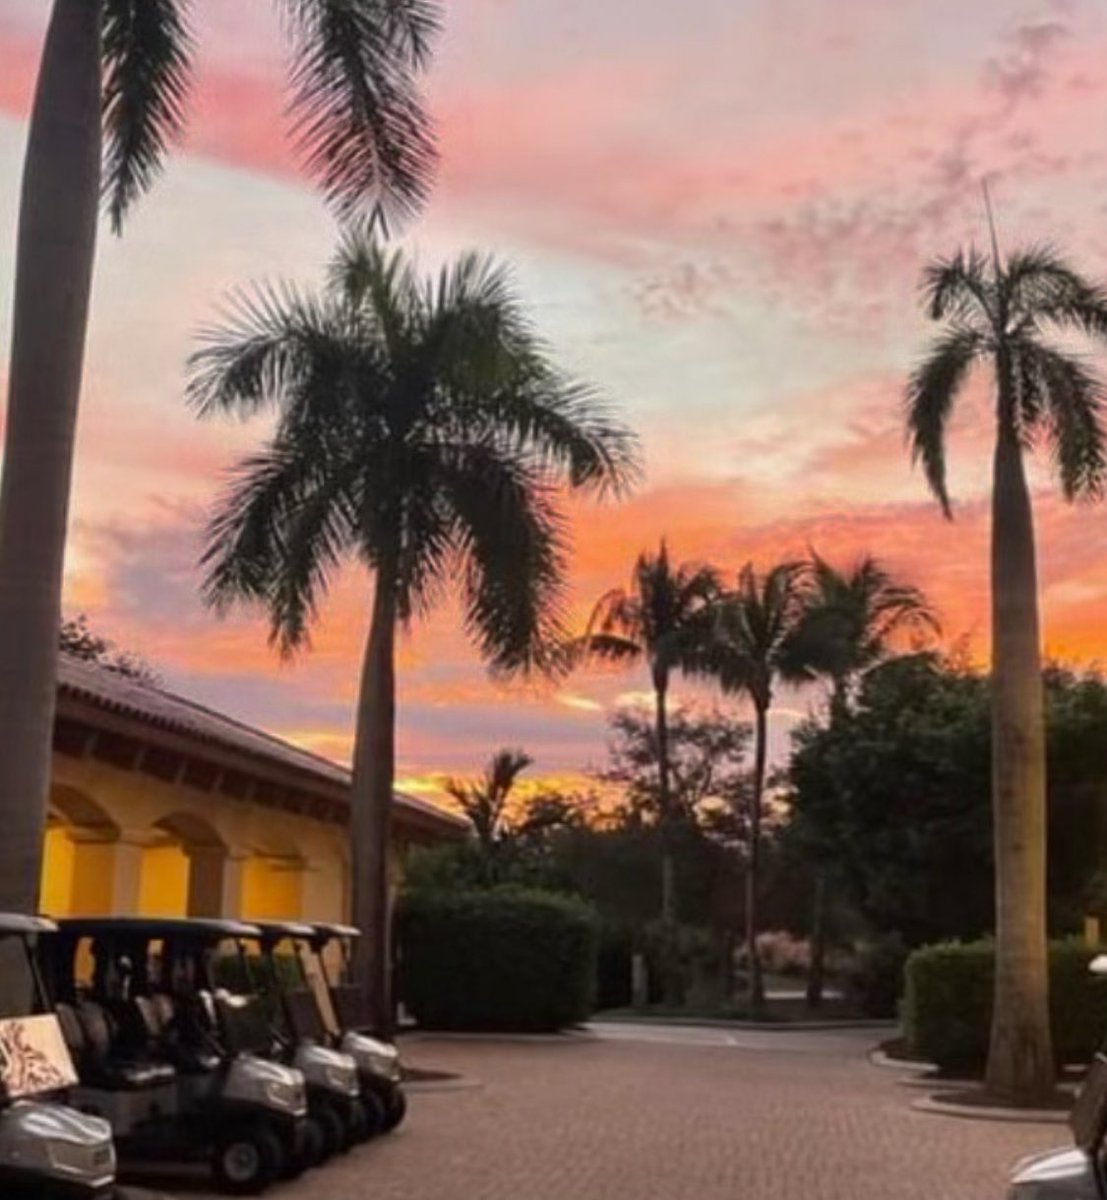 Beautiful start to the weekend. TGIF! From our @troon Tiburón team members, have a blessed and safe weekend everyone #weekendvibes #bekind